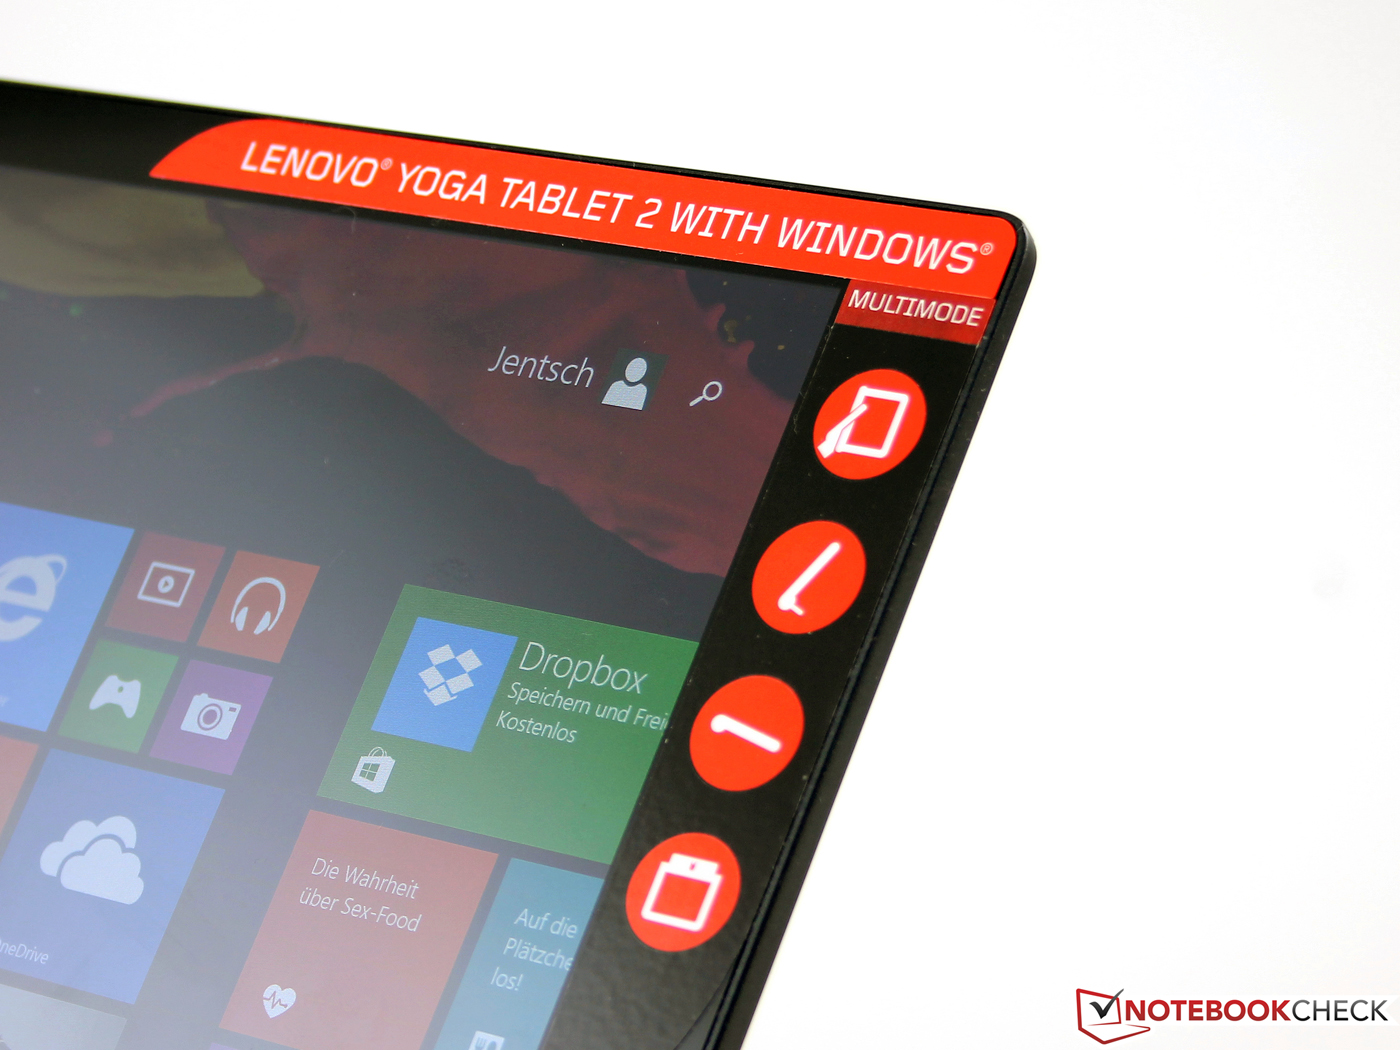 Lenovo Yoga 2 1051F Windows Tablet Review Update - NotebookCheck